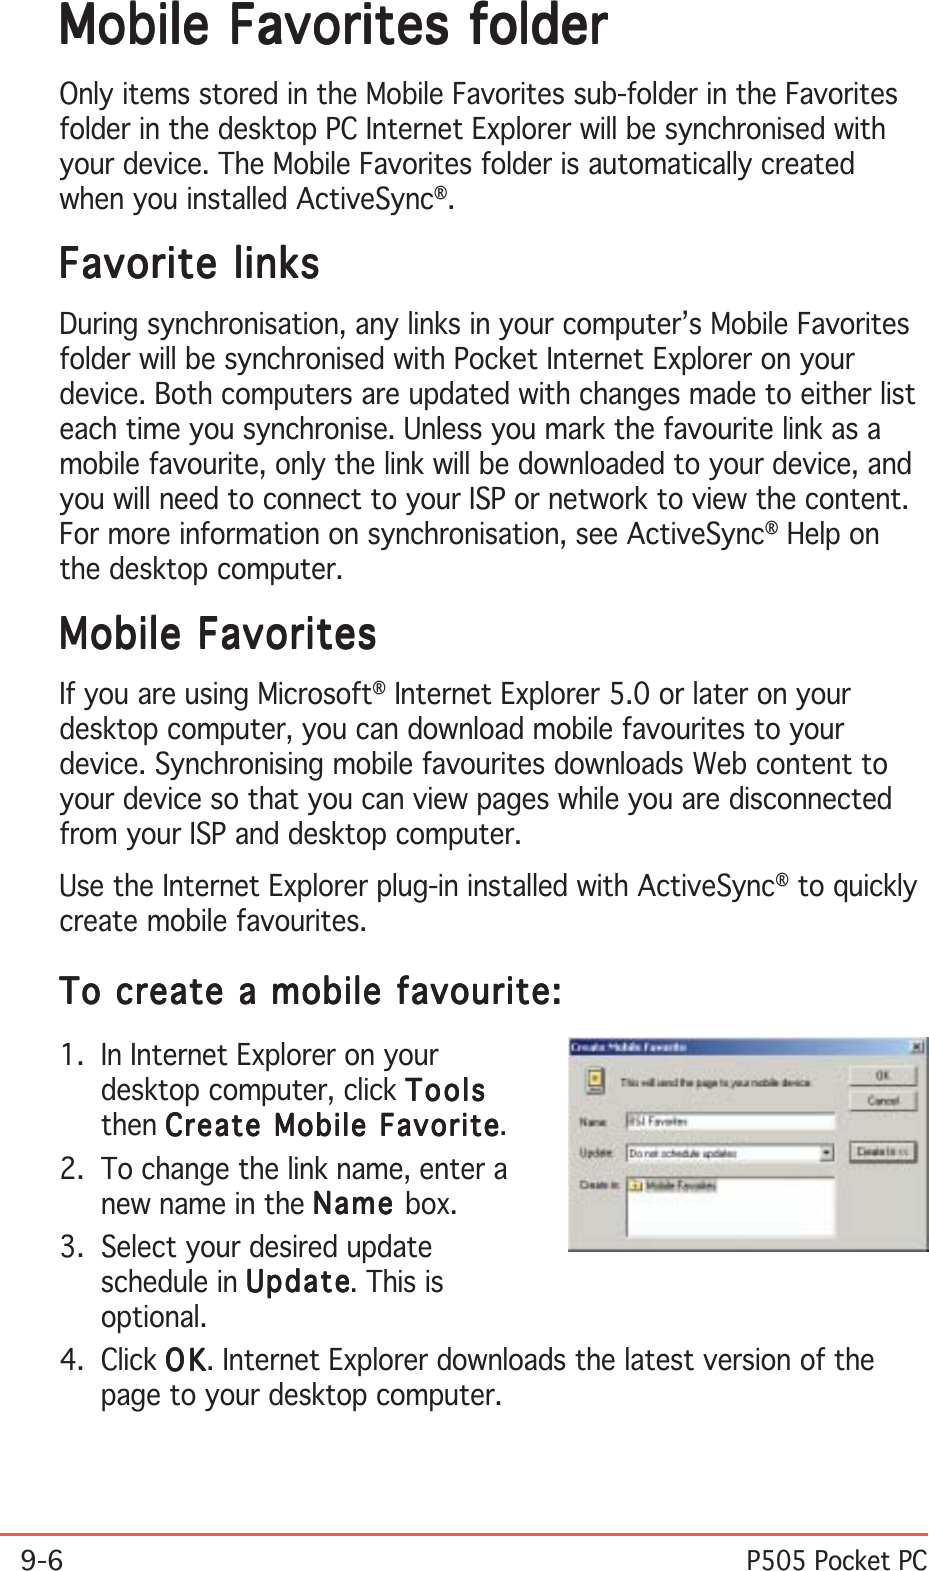 9-6P505 Pocket PCMobile Favorites folderMobile Favorites folderMobile Favorites folderMobile Favorites folderMobile Favorites folderOnly items stored in the Mobile Favorites sub-folder in the Favoritesfolder in the desktop PC Internet Explorer will be synchronised withyour device. The Mobile Favorites folder is automatically createdwhen you installed ActiveSync®.Favorite linksFavorite linksFavorite linksFavorite linksFavorite linksDuring synchronisation, any links in your computer’s Mobile Favoritesfolder will be synchronised with Pocket Internet Explorer on yourdevice. Both computers are updated with changes made to either listeach time you synchronise. Unless you mark the favourite link as amobile favourite, only the link will be downloaded to your device, andyou will need to connect to your ISP or network to view the content.For more information on synchronisation, see ActiveSync® Help onthe desktop computer.Mobile FavoritesMobile FavoritesMobile FavoritesMobile FavoritesMobile FavoritesIf you are using Microsoft® Internet Explorer 5.0 or later on yourdesktop computer, you can download mobile favourites to yourdevice. Synchronising mobile favourites downloads Web content toyour device so that you can view pages while you are disconnectedfrom your ISP and desktop computer.Use the Internet Explorer plug-in installed with ActiveSync® to quicklycreate mobile favourites.To create a mobile favourite:To create a mobile favourite:To create a mobile favourite:To create a mobile favourite:To create a mobile favourite:1. In Internet Explorer on yourdesktop computer, click ToolsToolsToolsToolsToolsthen Create Mobile FavoriteCreate Mobile FavoriteCreate Mobile FavoriteCreate Mobile FavoriteCreate Mobile Favorite.2. To change the link name, enter anew name in the NameNameNameNameName box.3. Select your desired updateschedule in UpdateUpdateUpdateUpdateUpd ate. This isoptional.4. Click OKOKOKOKO K. Internet Explorer downloads the latest version of thepage to your desktop computer.